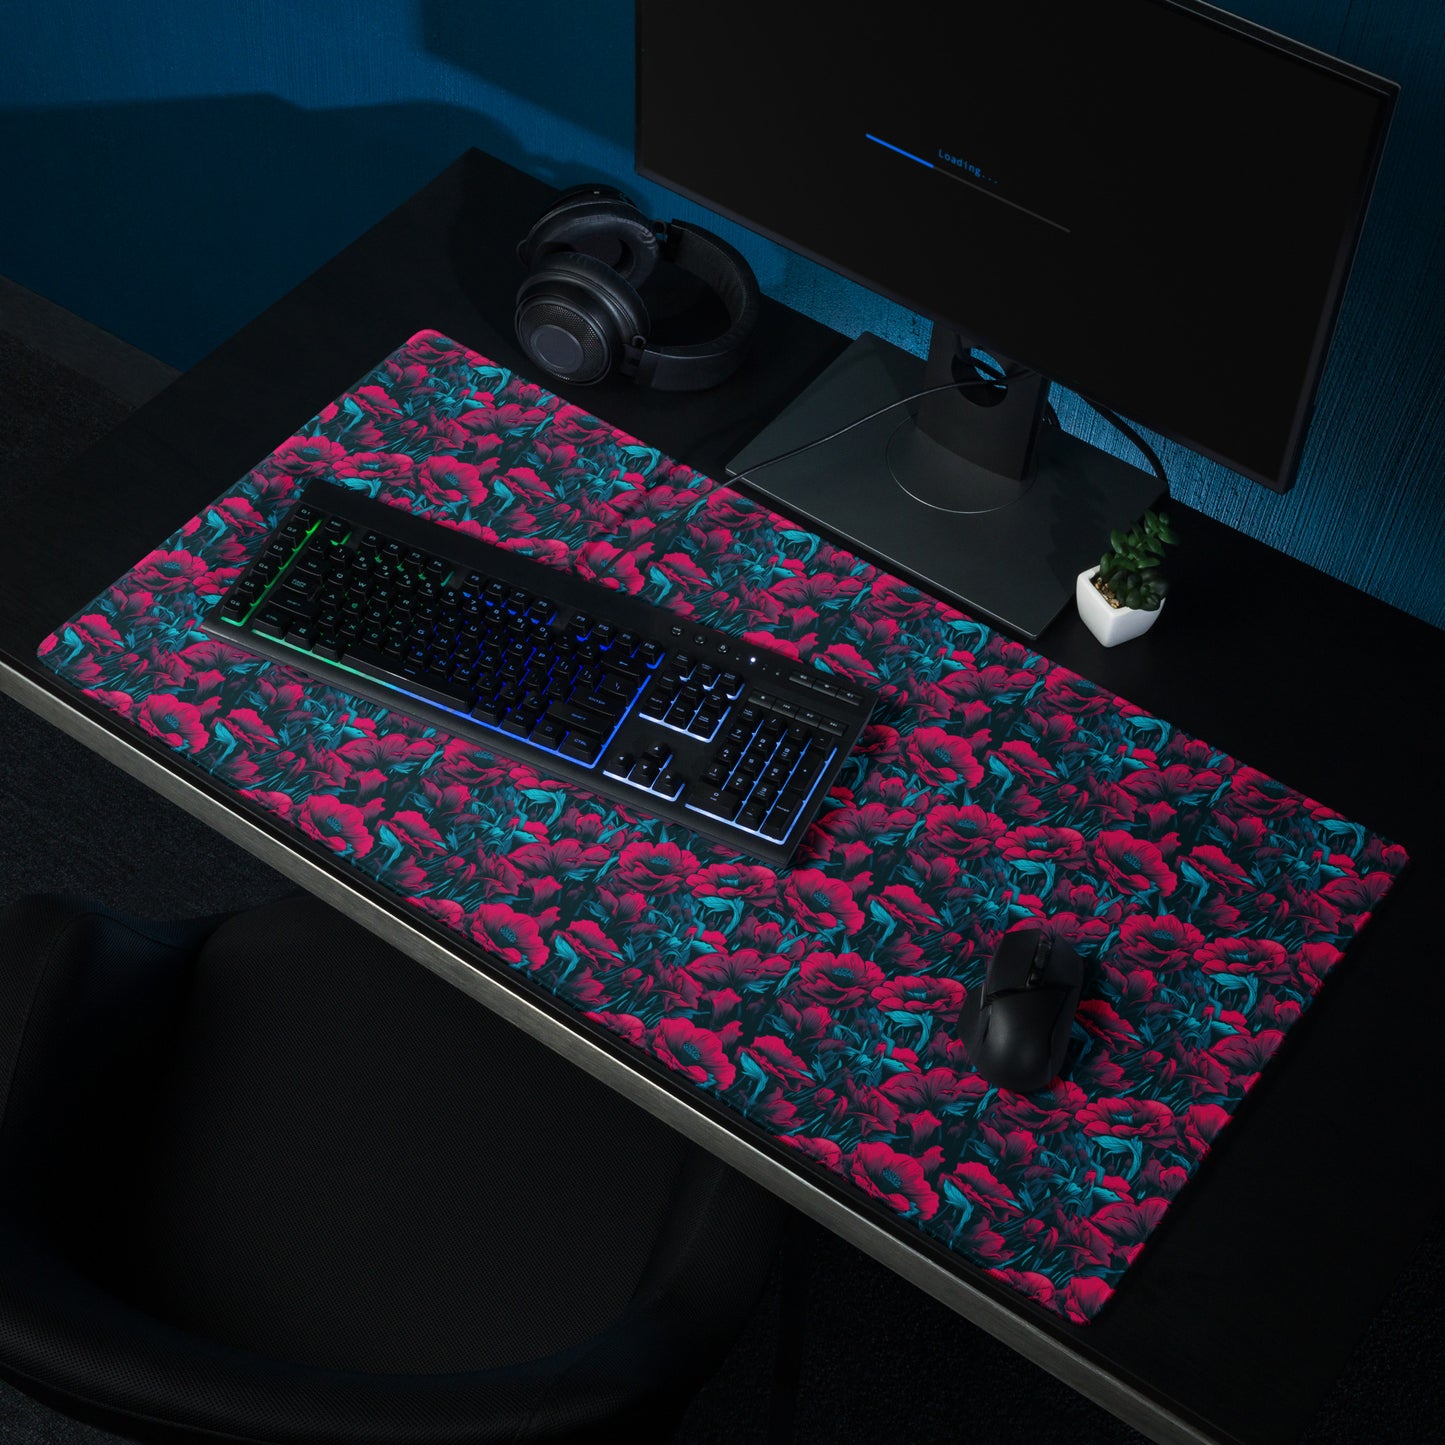 A 36" x 18" desk pad with a red and blue floral pattern sitting on a desk.